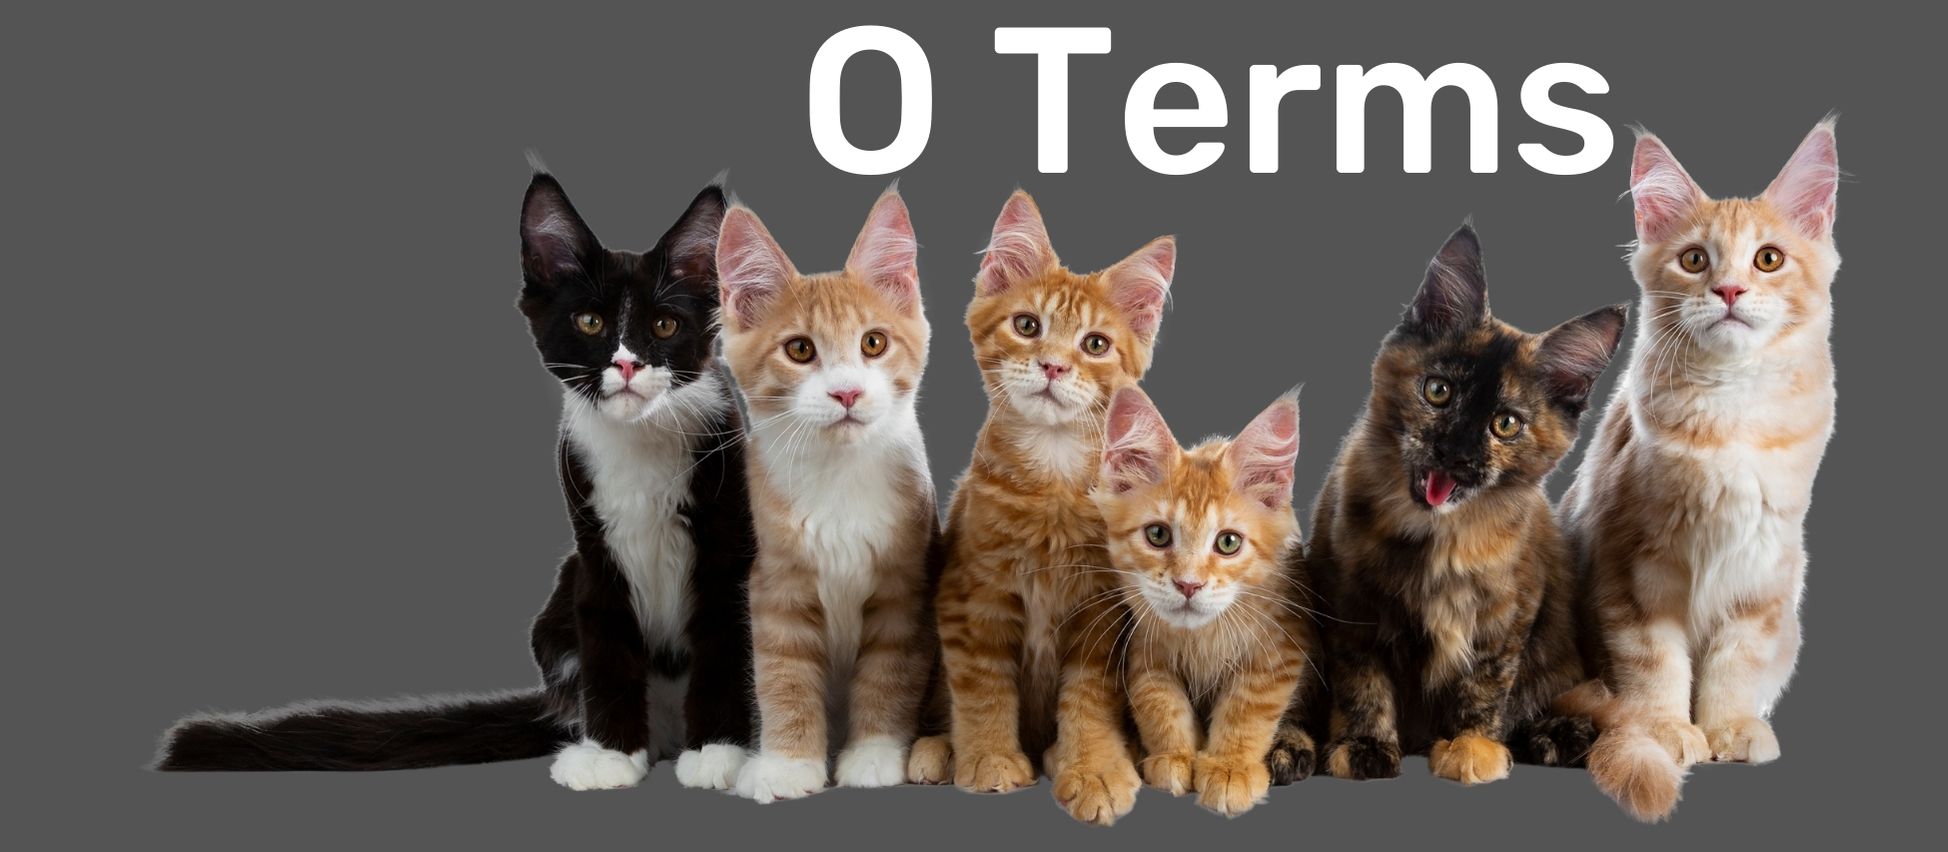 Group of six cats in front of a gray background with text reading 'O Terms' at the top to indicate a new section of the glossary